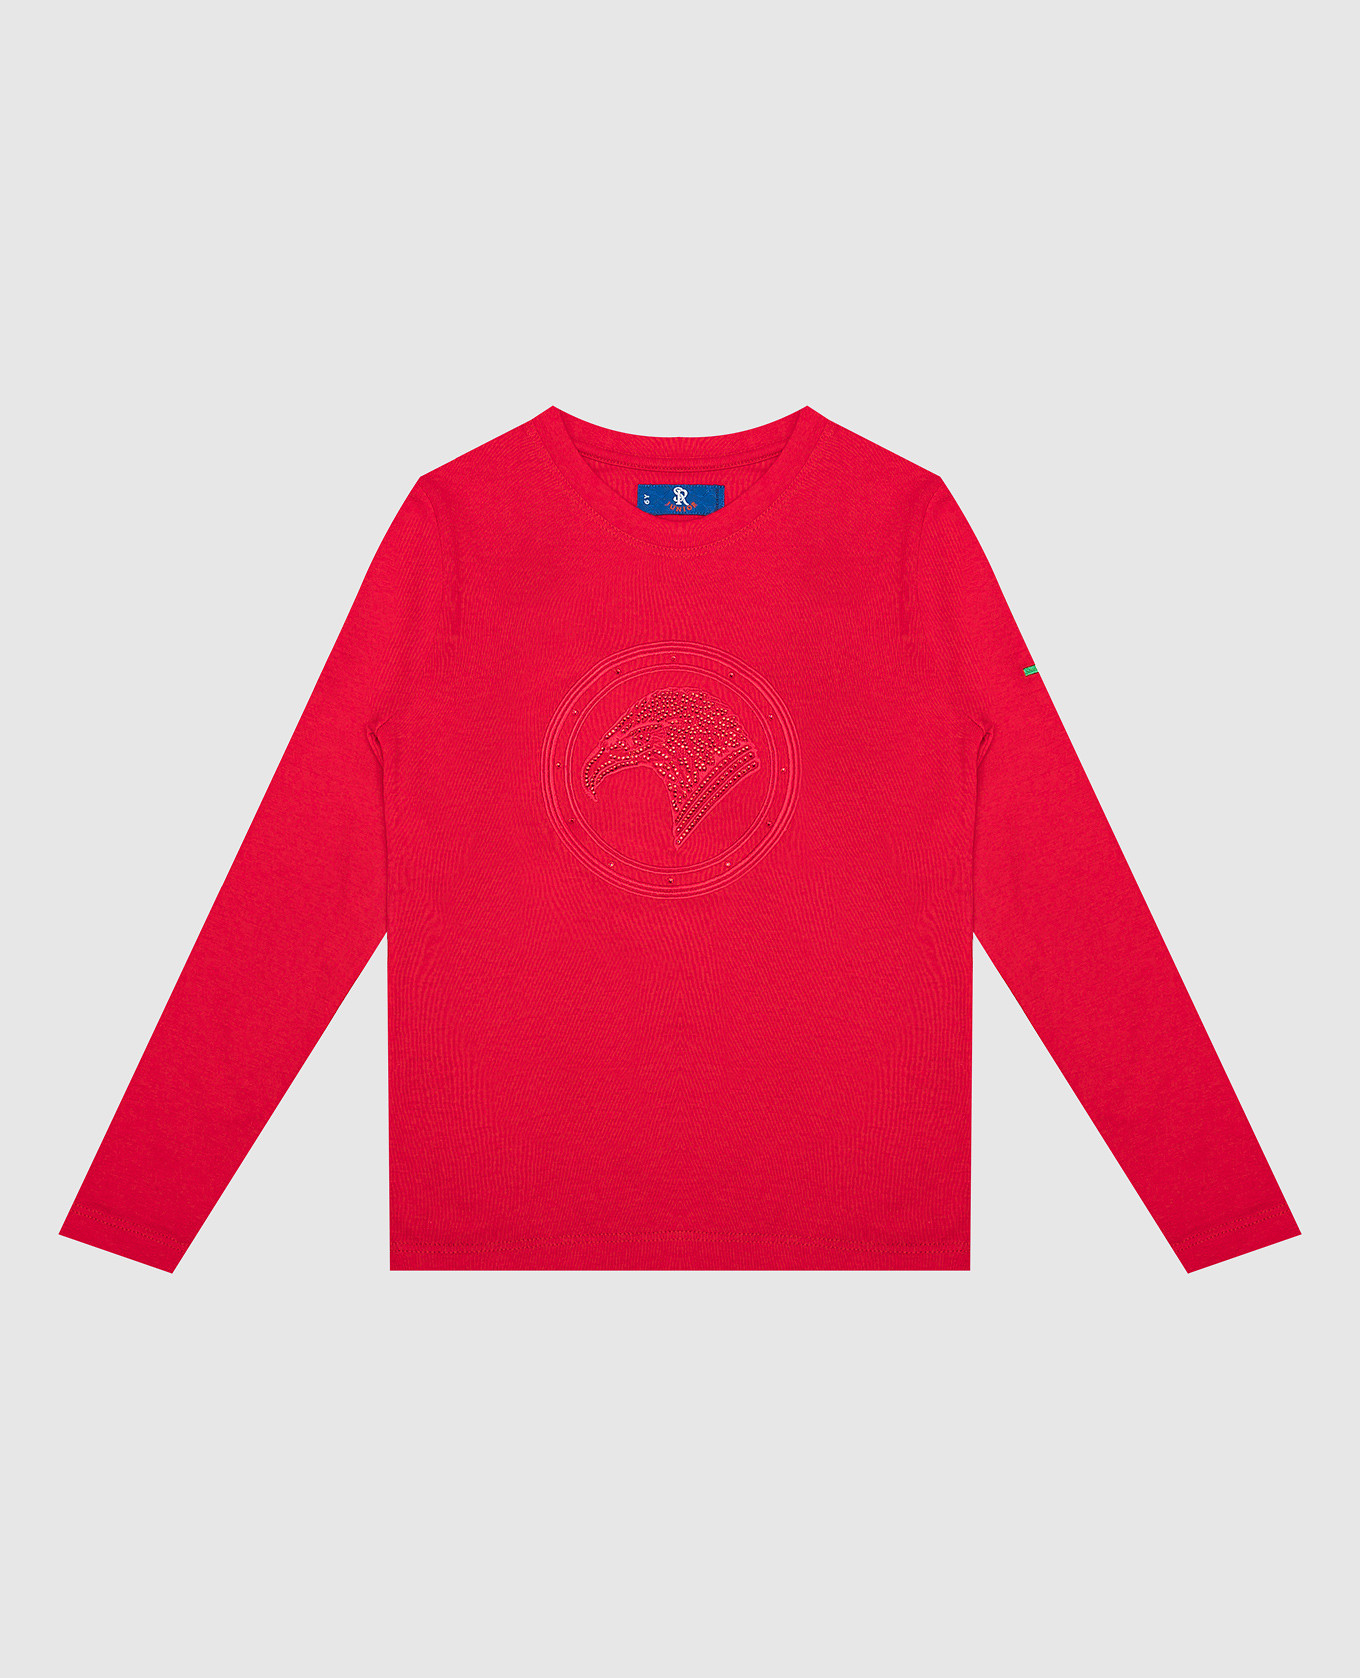 Children's red longsleeve with embroidery and crystals